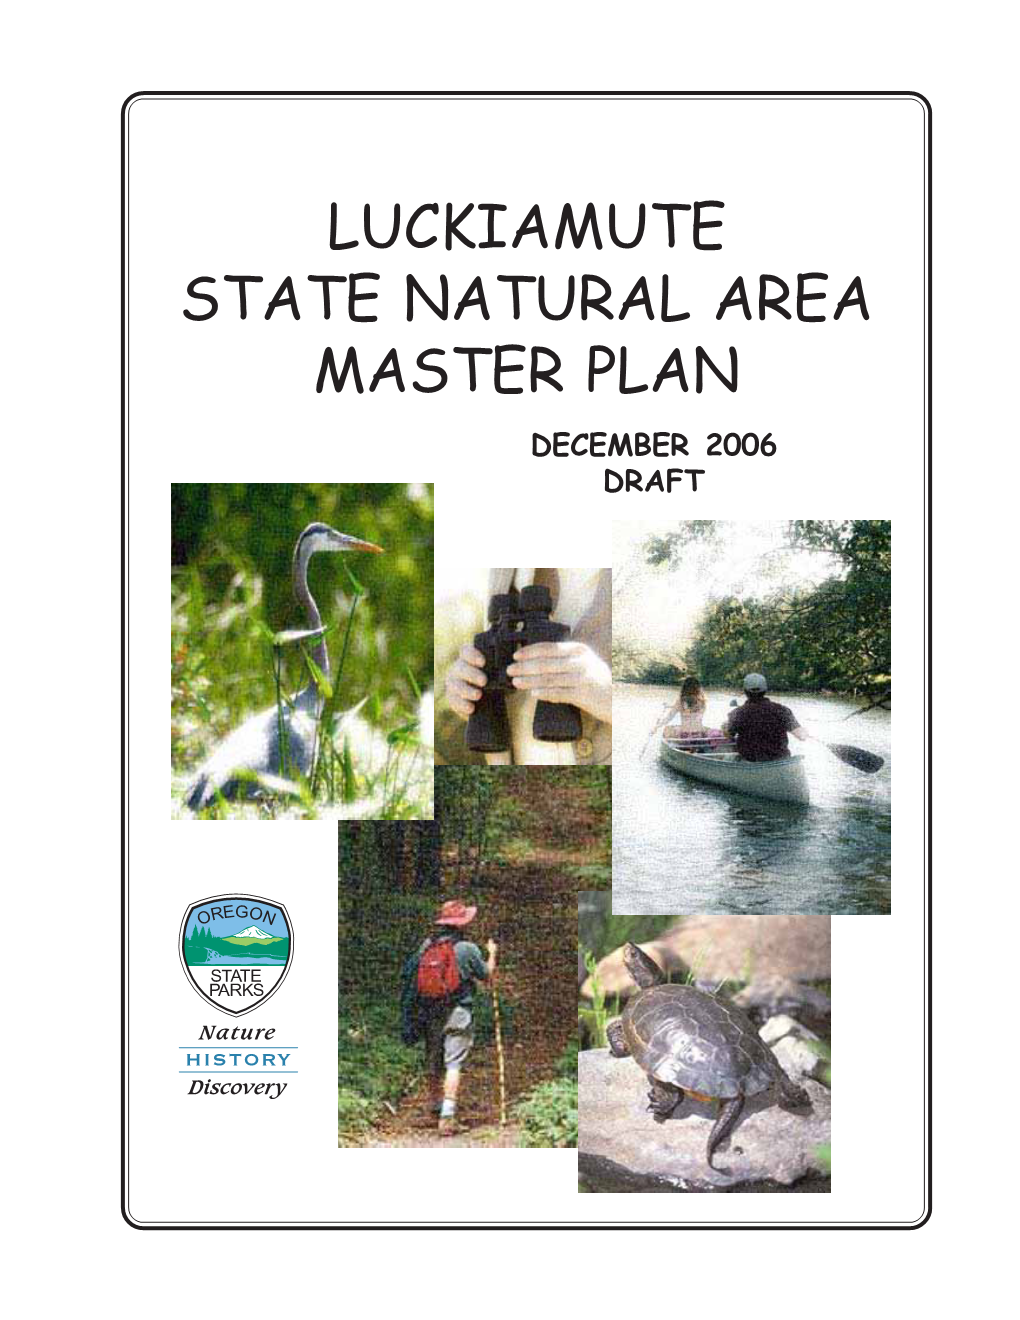 Luckiamute State Natural Area Master Plan